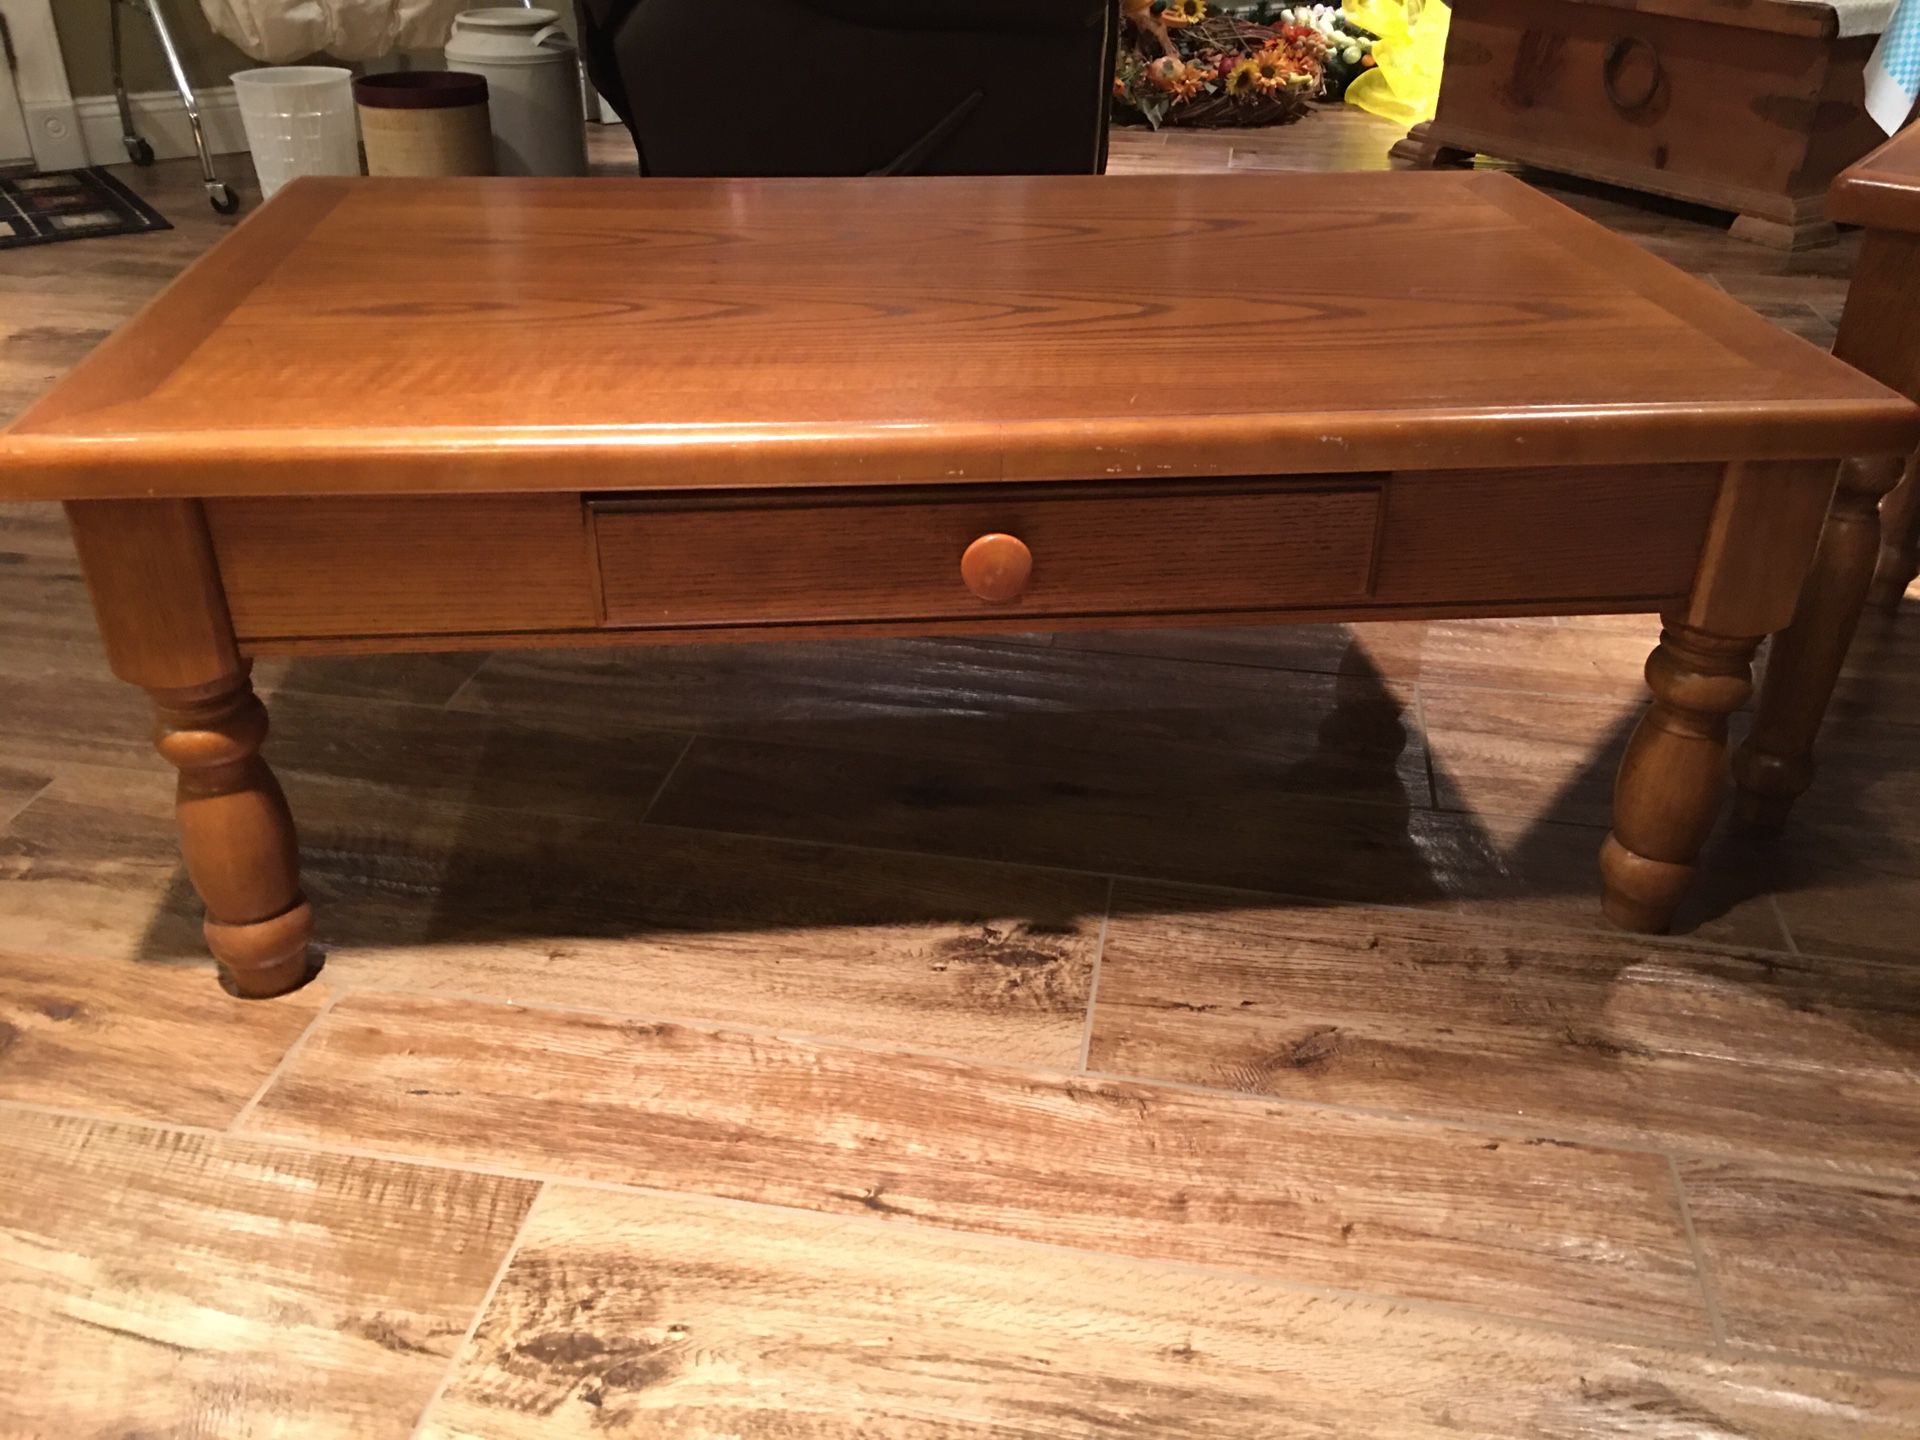 Matching solid oak coffee and end table